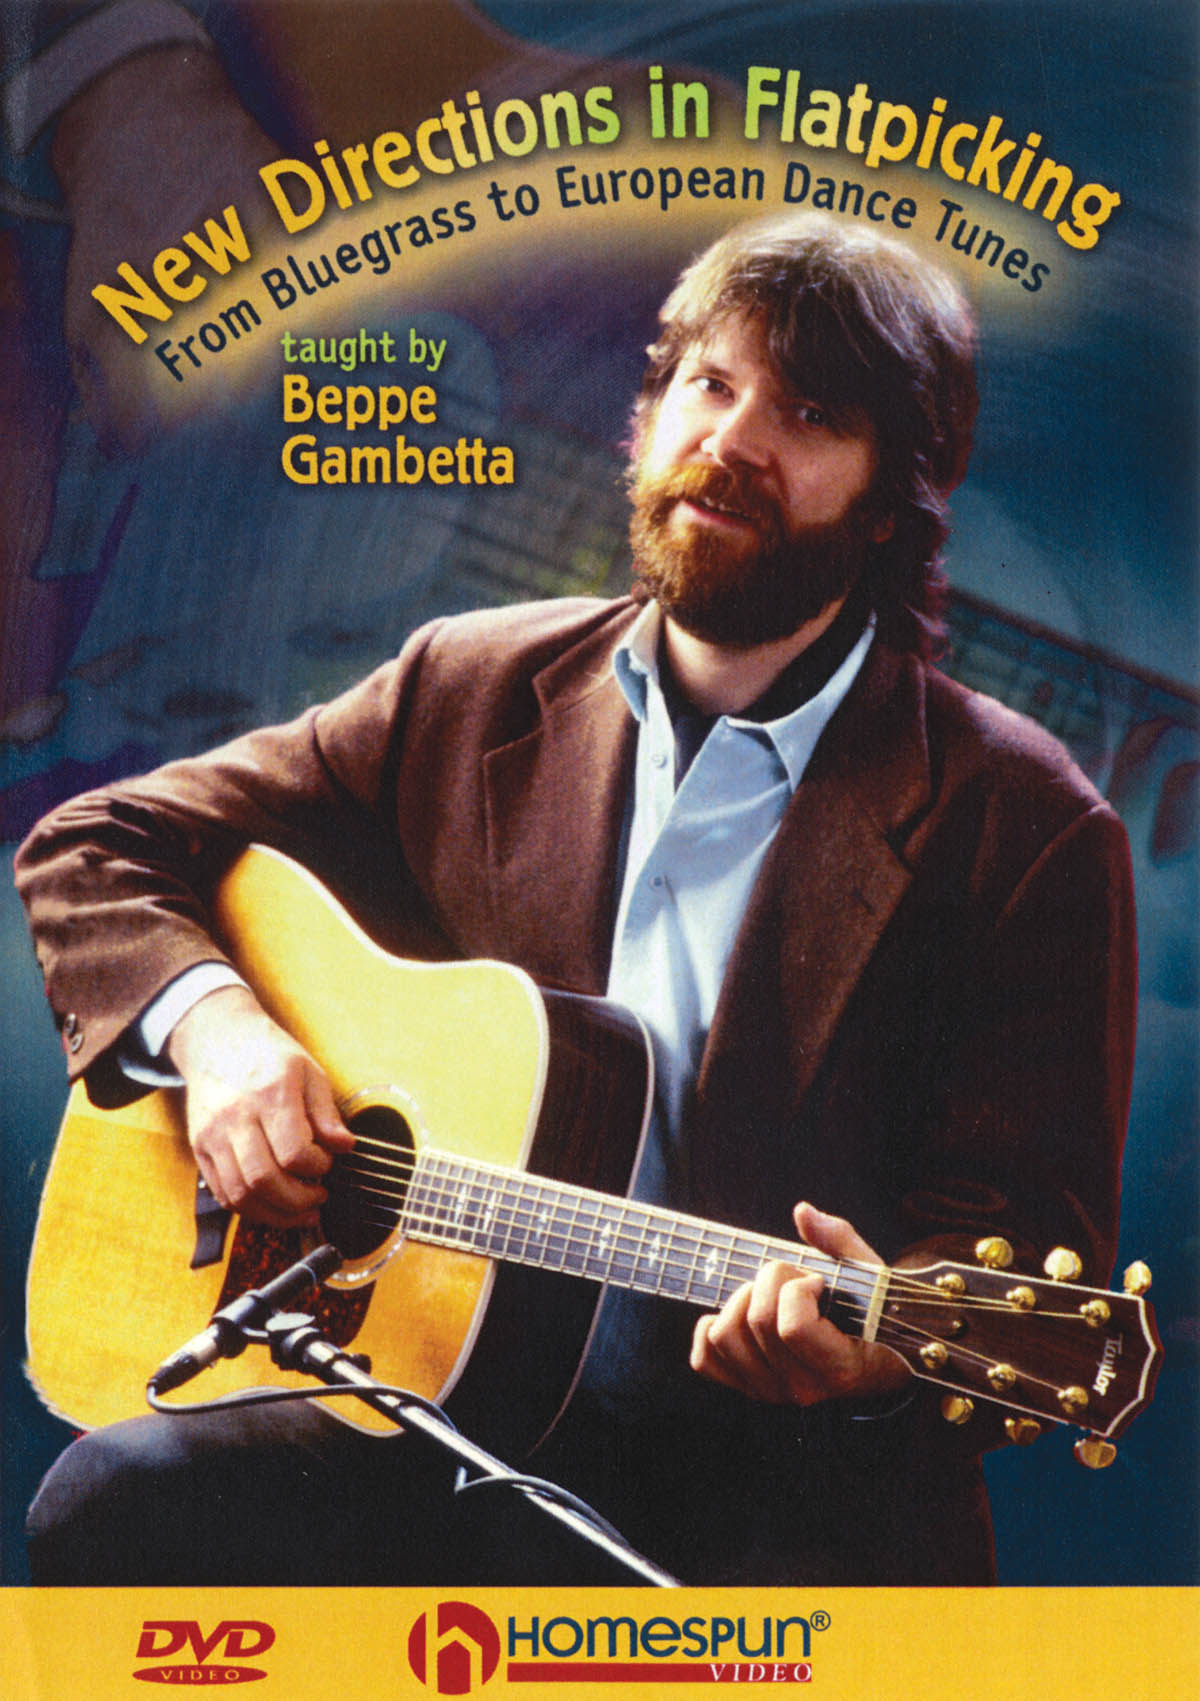 Beppe Gambetta: New Directions In Flatpicking